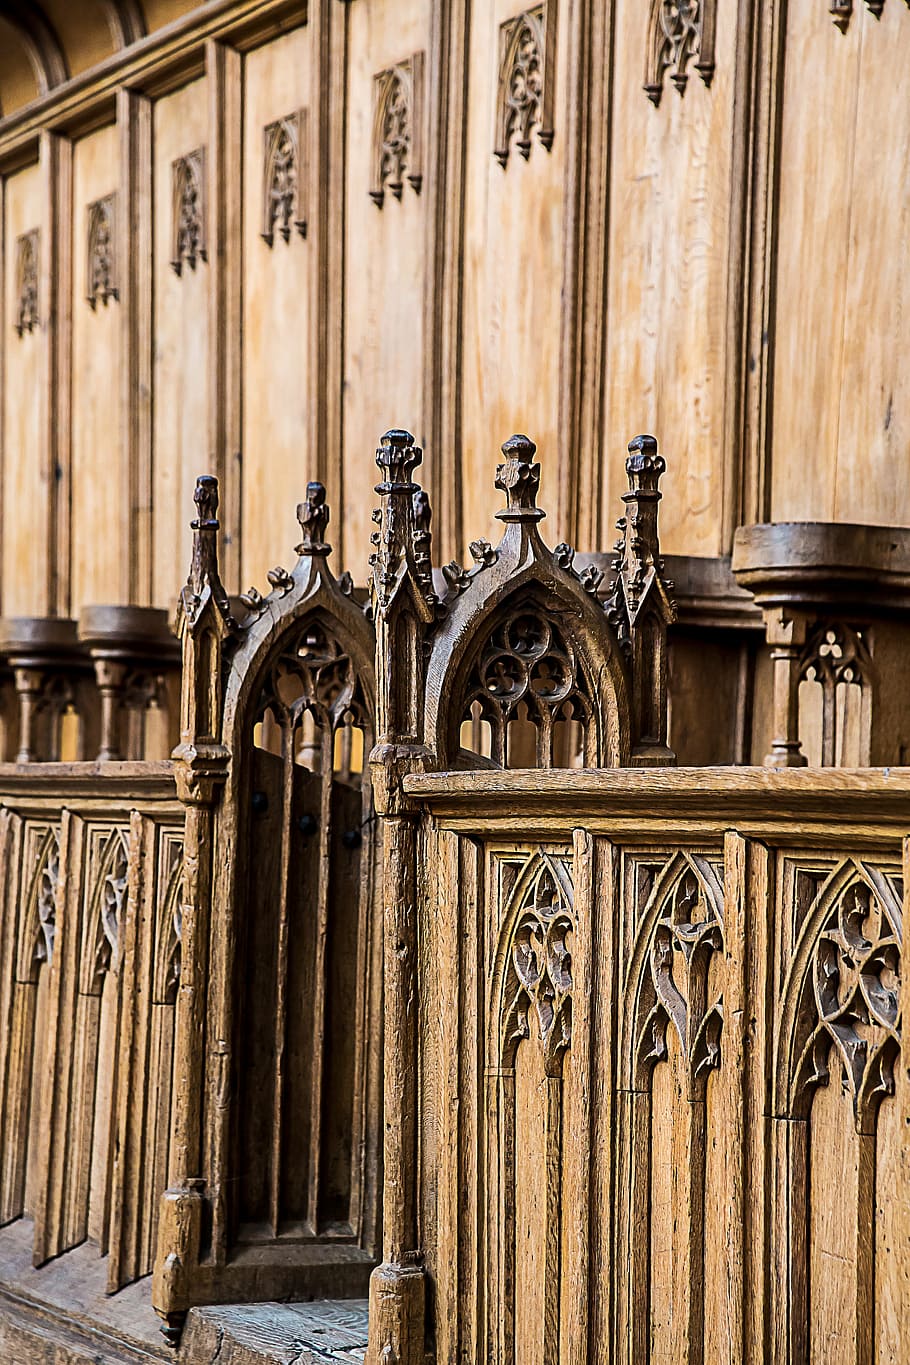 rothenburg of the deaf, santa jacob, choir stalls, architecture, church, cathedral, built structure, the past, wood - material, history